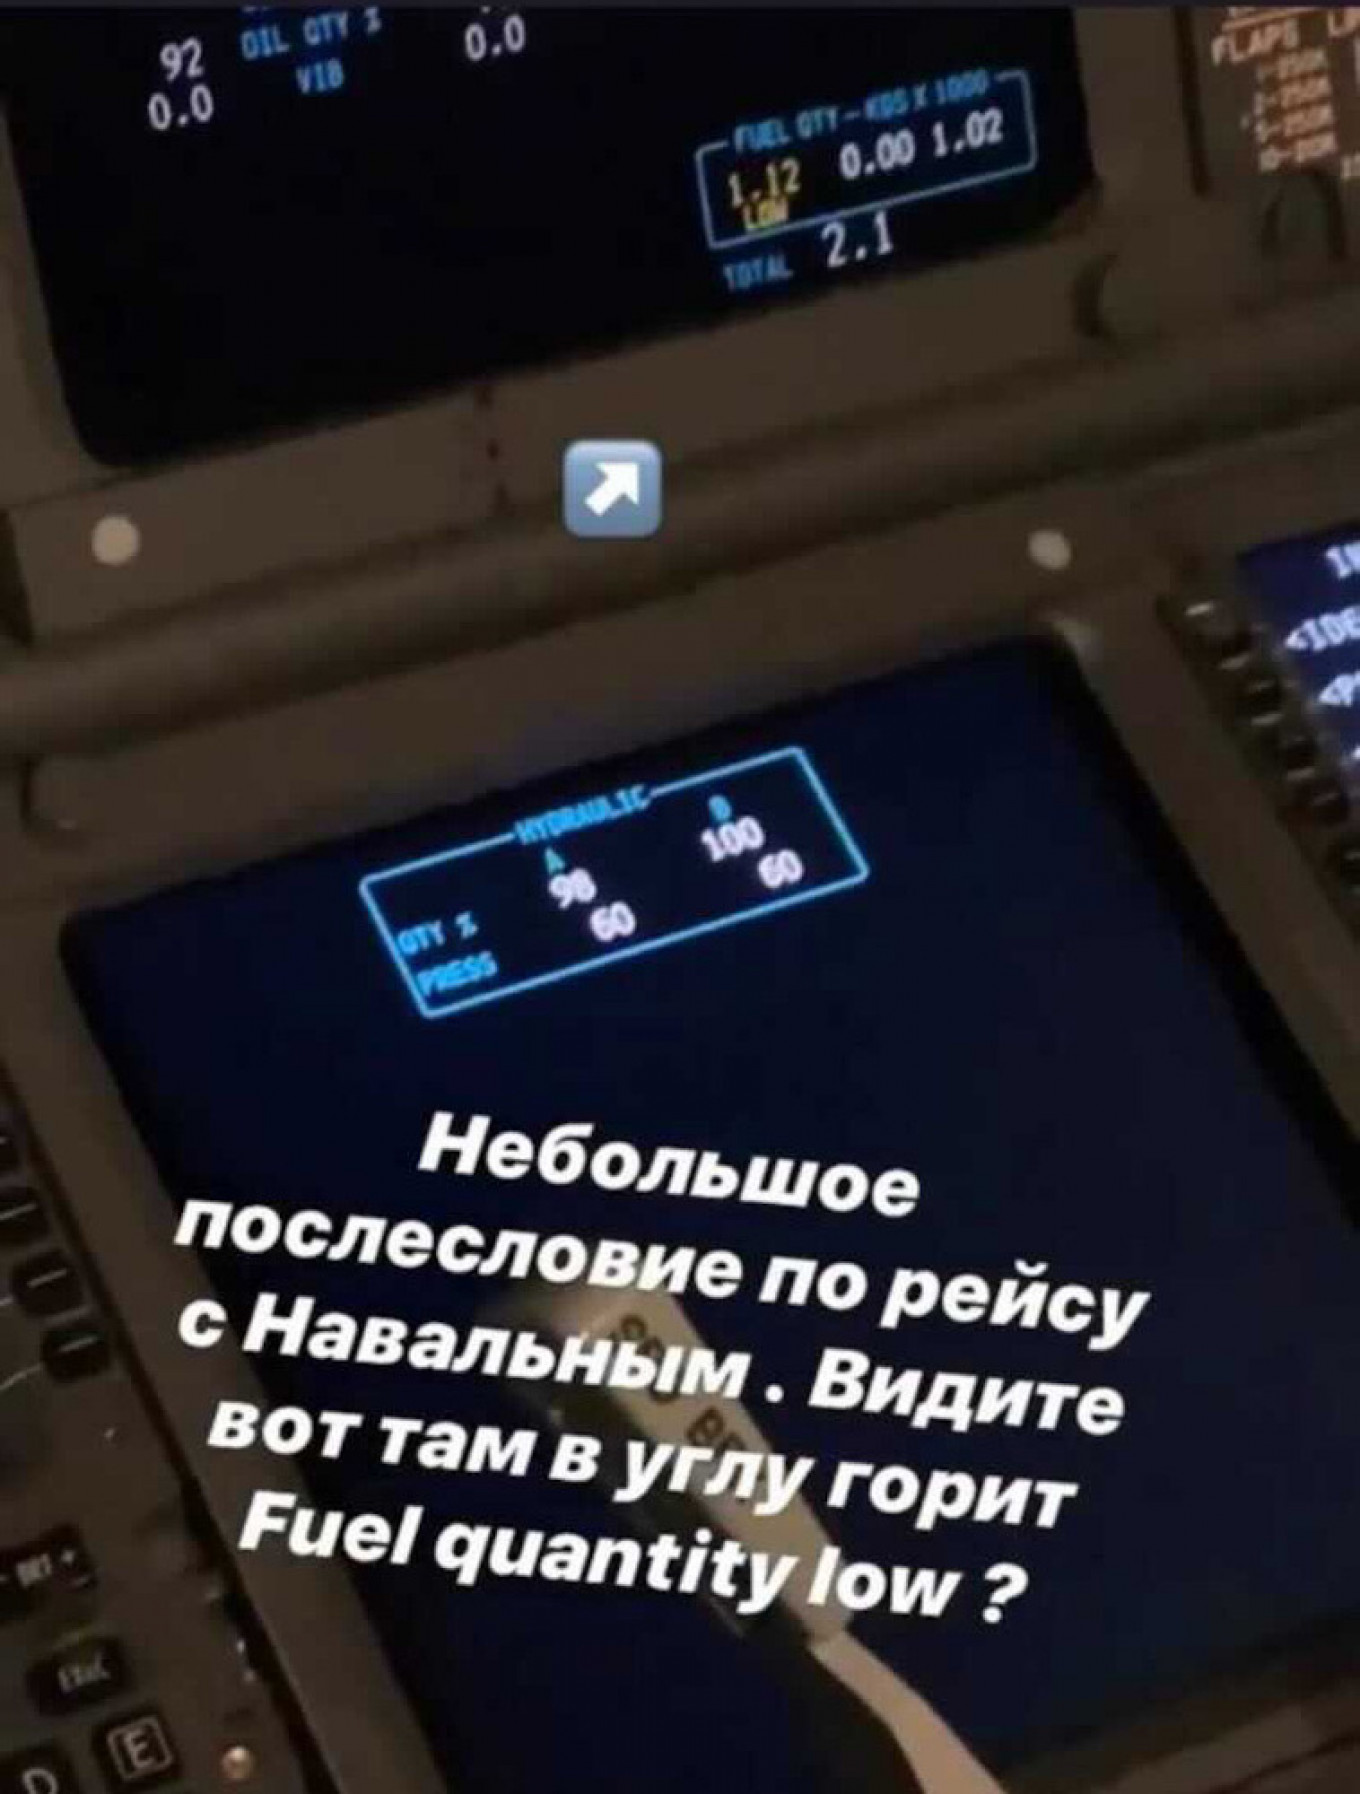 
					Pilot Maksim Pirkov posted a picture reportedly sent to him by one of the pilots who flew on evening which appears to be a picture of the control panel of the cockpit showing a low fuel gauge.					 					Instagram				